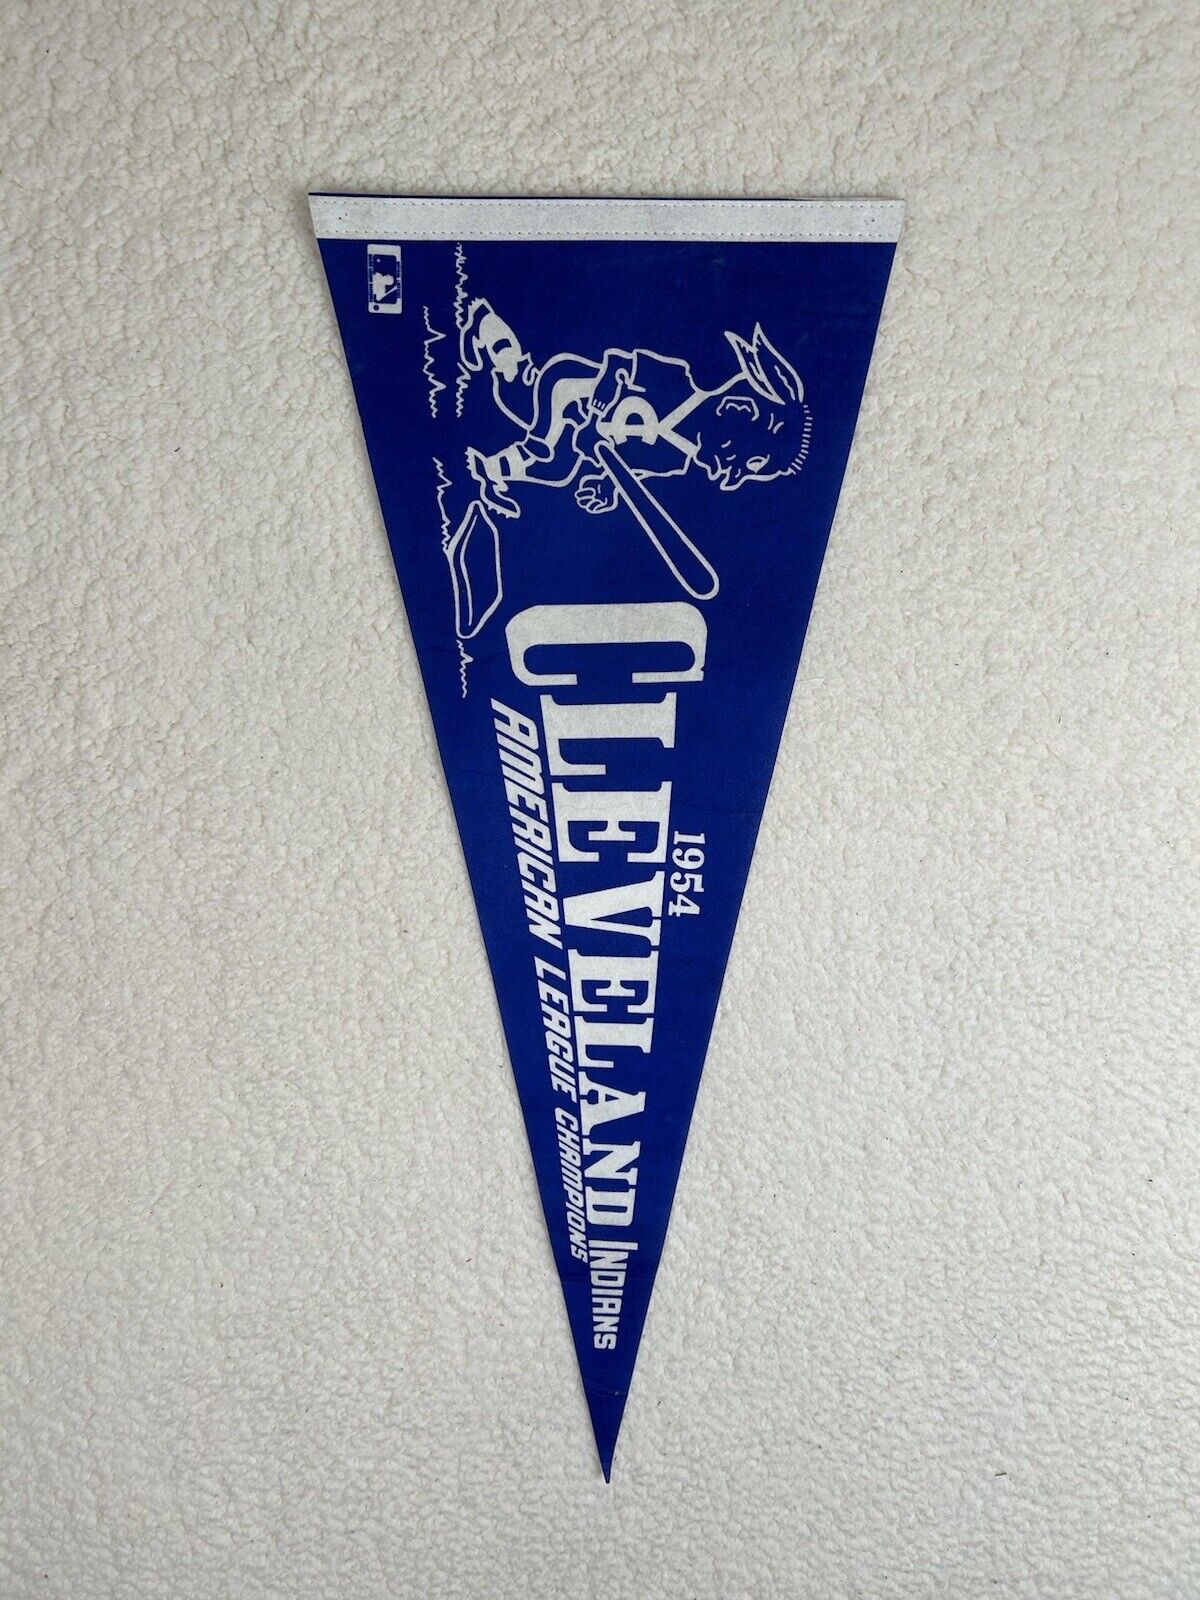 1954 Cleveland Indians World series Blue Repro pennant American League Champions